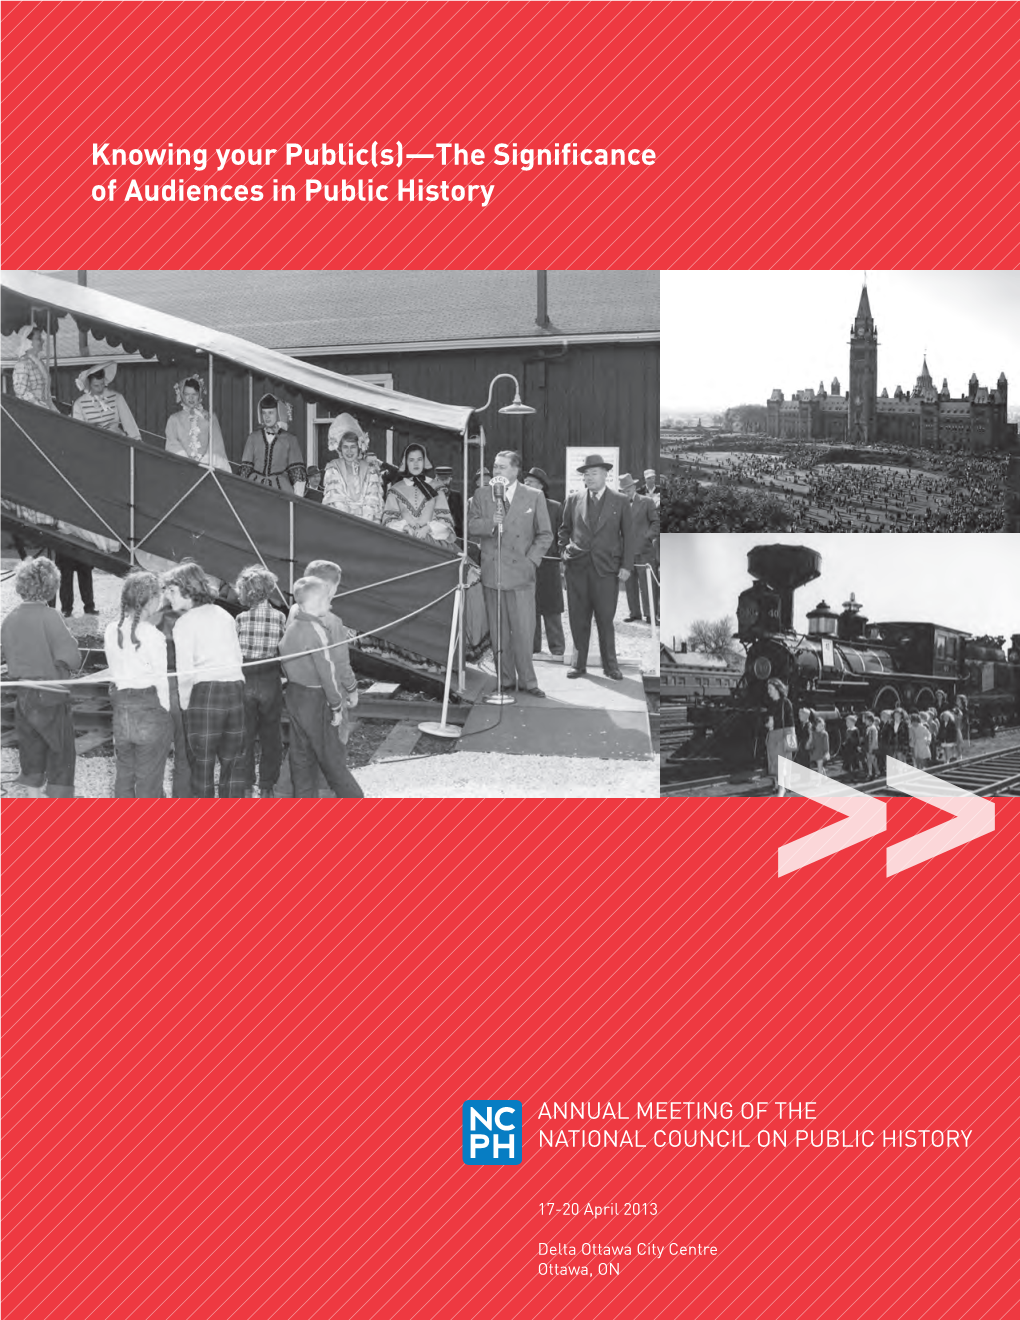 Knowing Your Public(S)—The Significance of Audiences in Public History